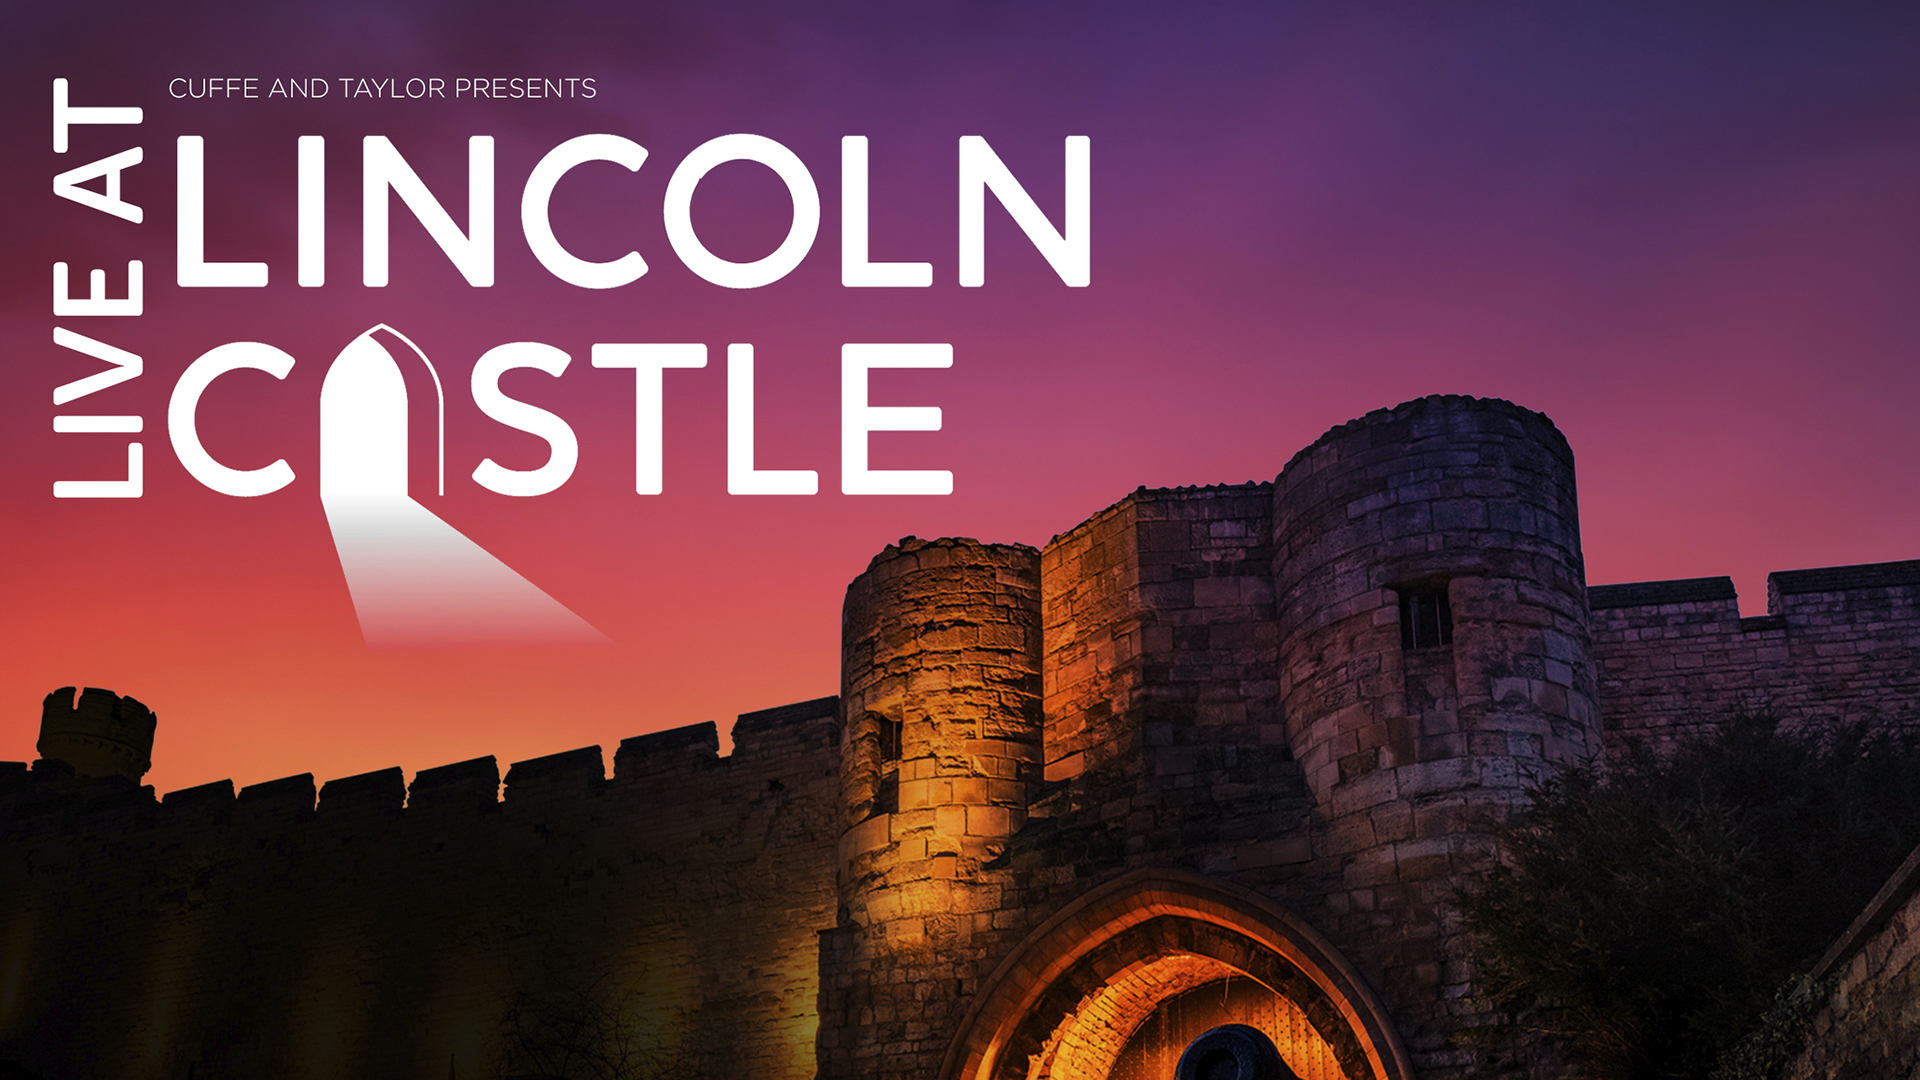 Image of Lincoln Castle